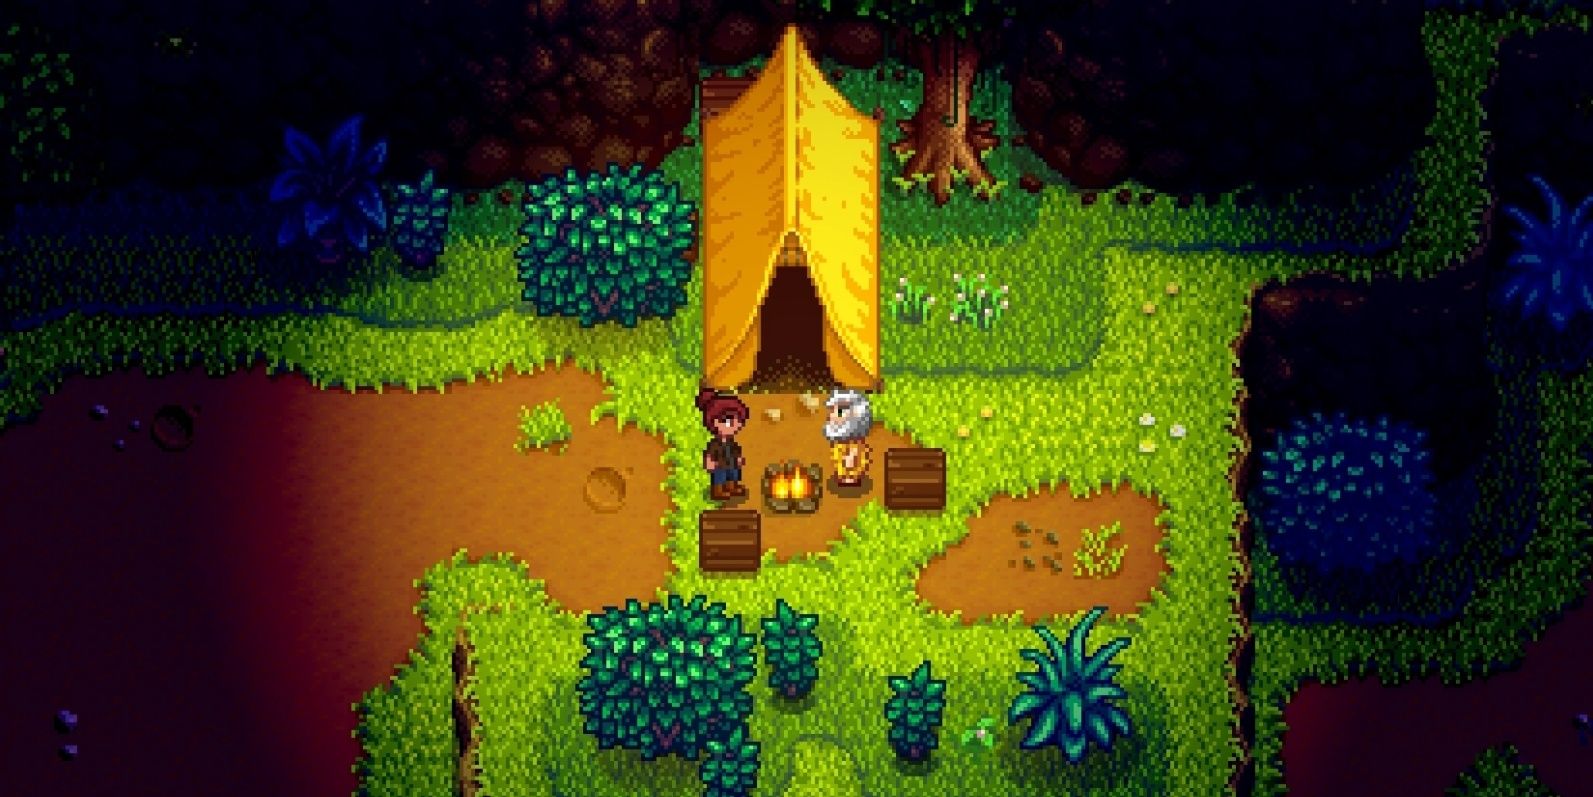 Linus and the player chatting at his tent in Stardew Valley